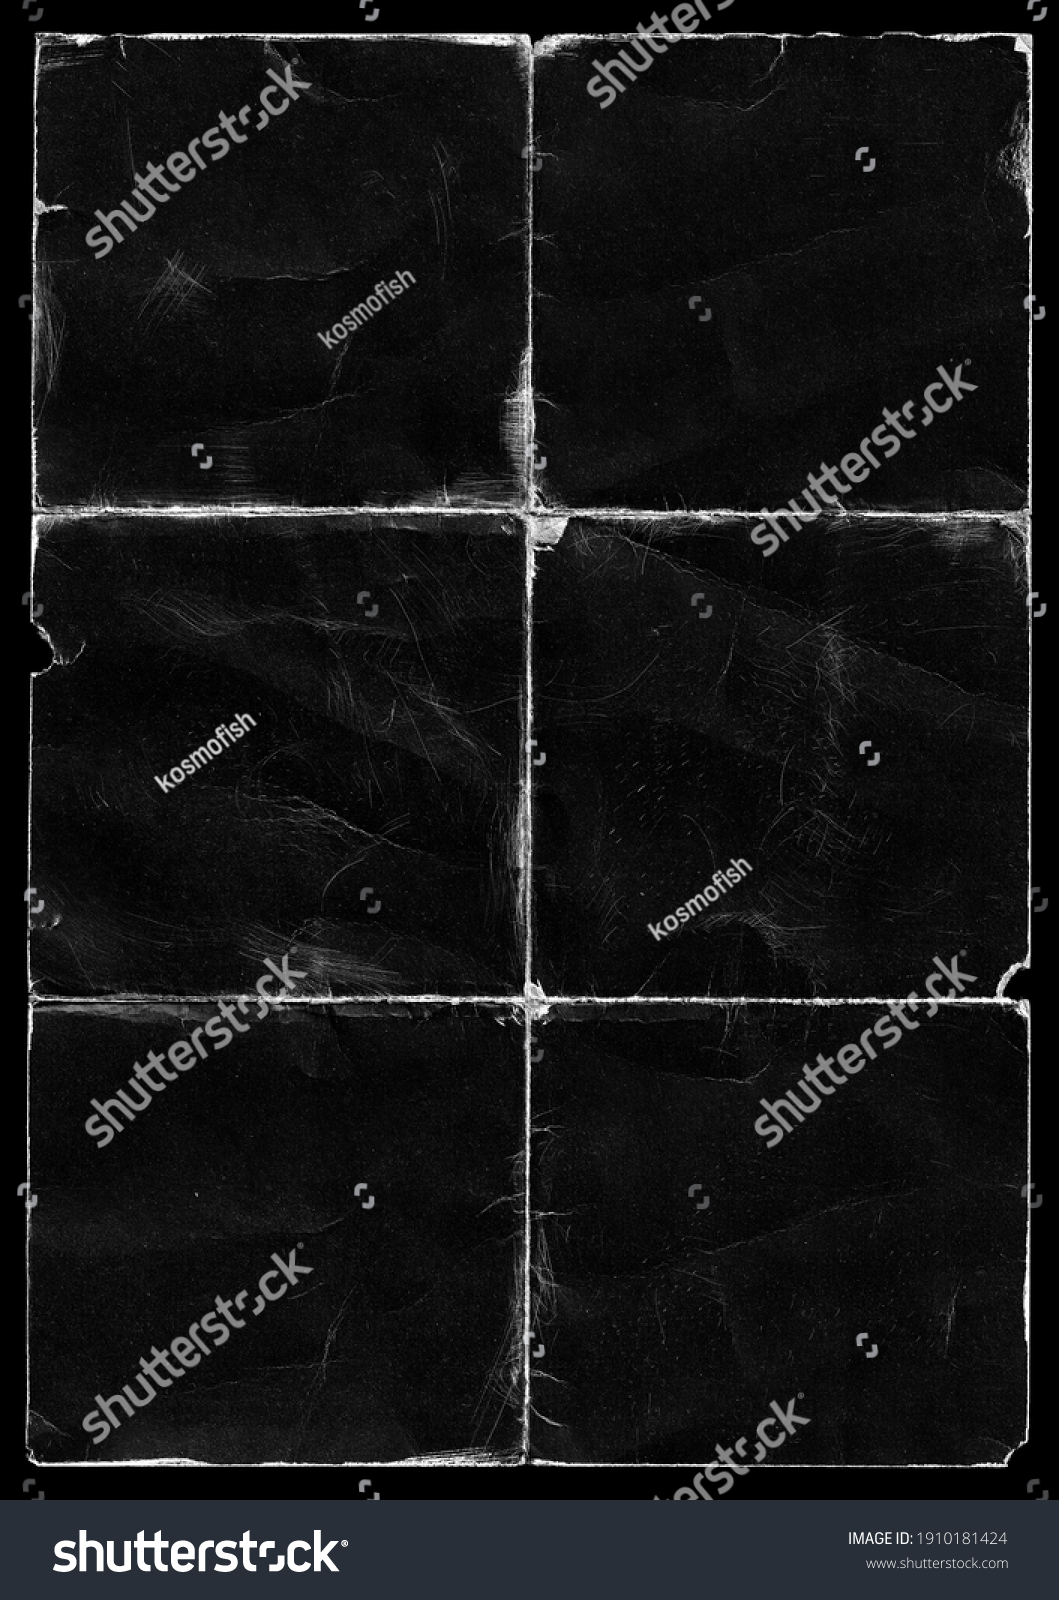 Old Black Empty Ripped Folded Torn Cardboard Paper Poster. Grunge Scratched Old Shabby Surface. Distressed Overlay Texture for Collage. 
 #1910181424